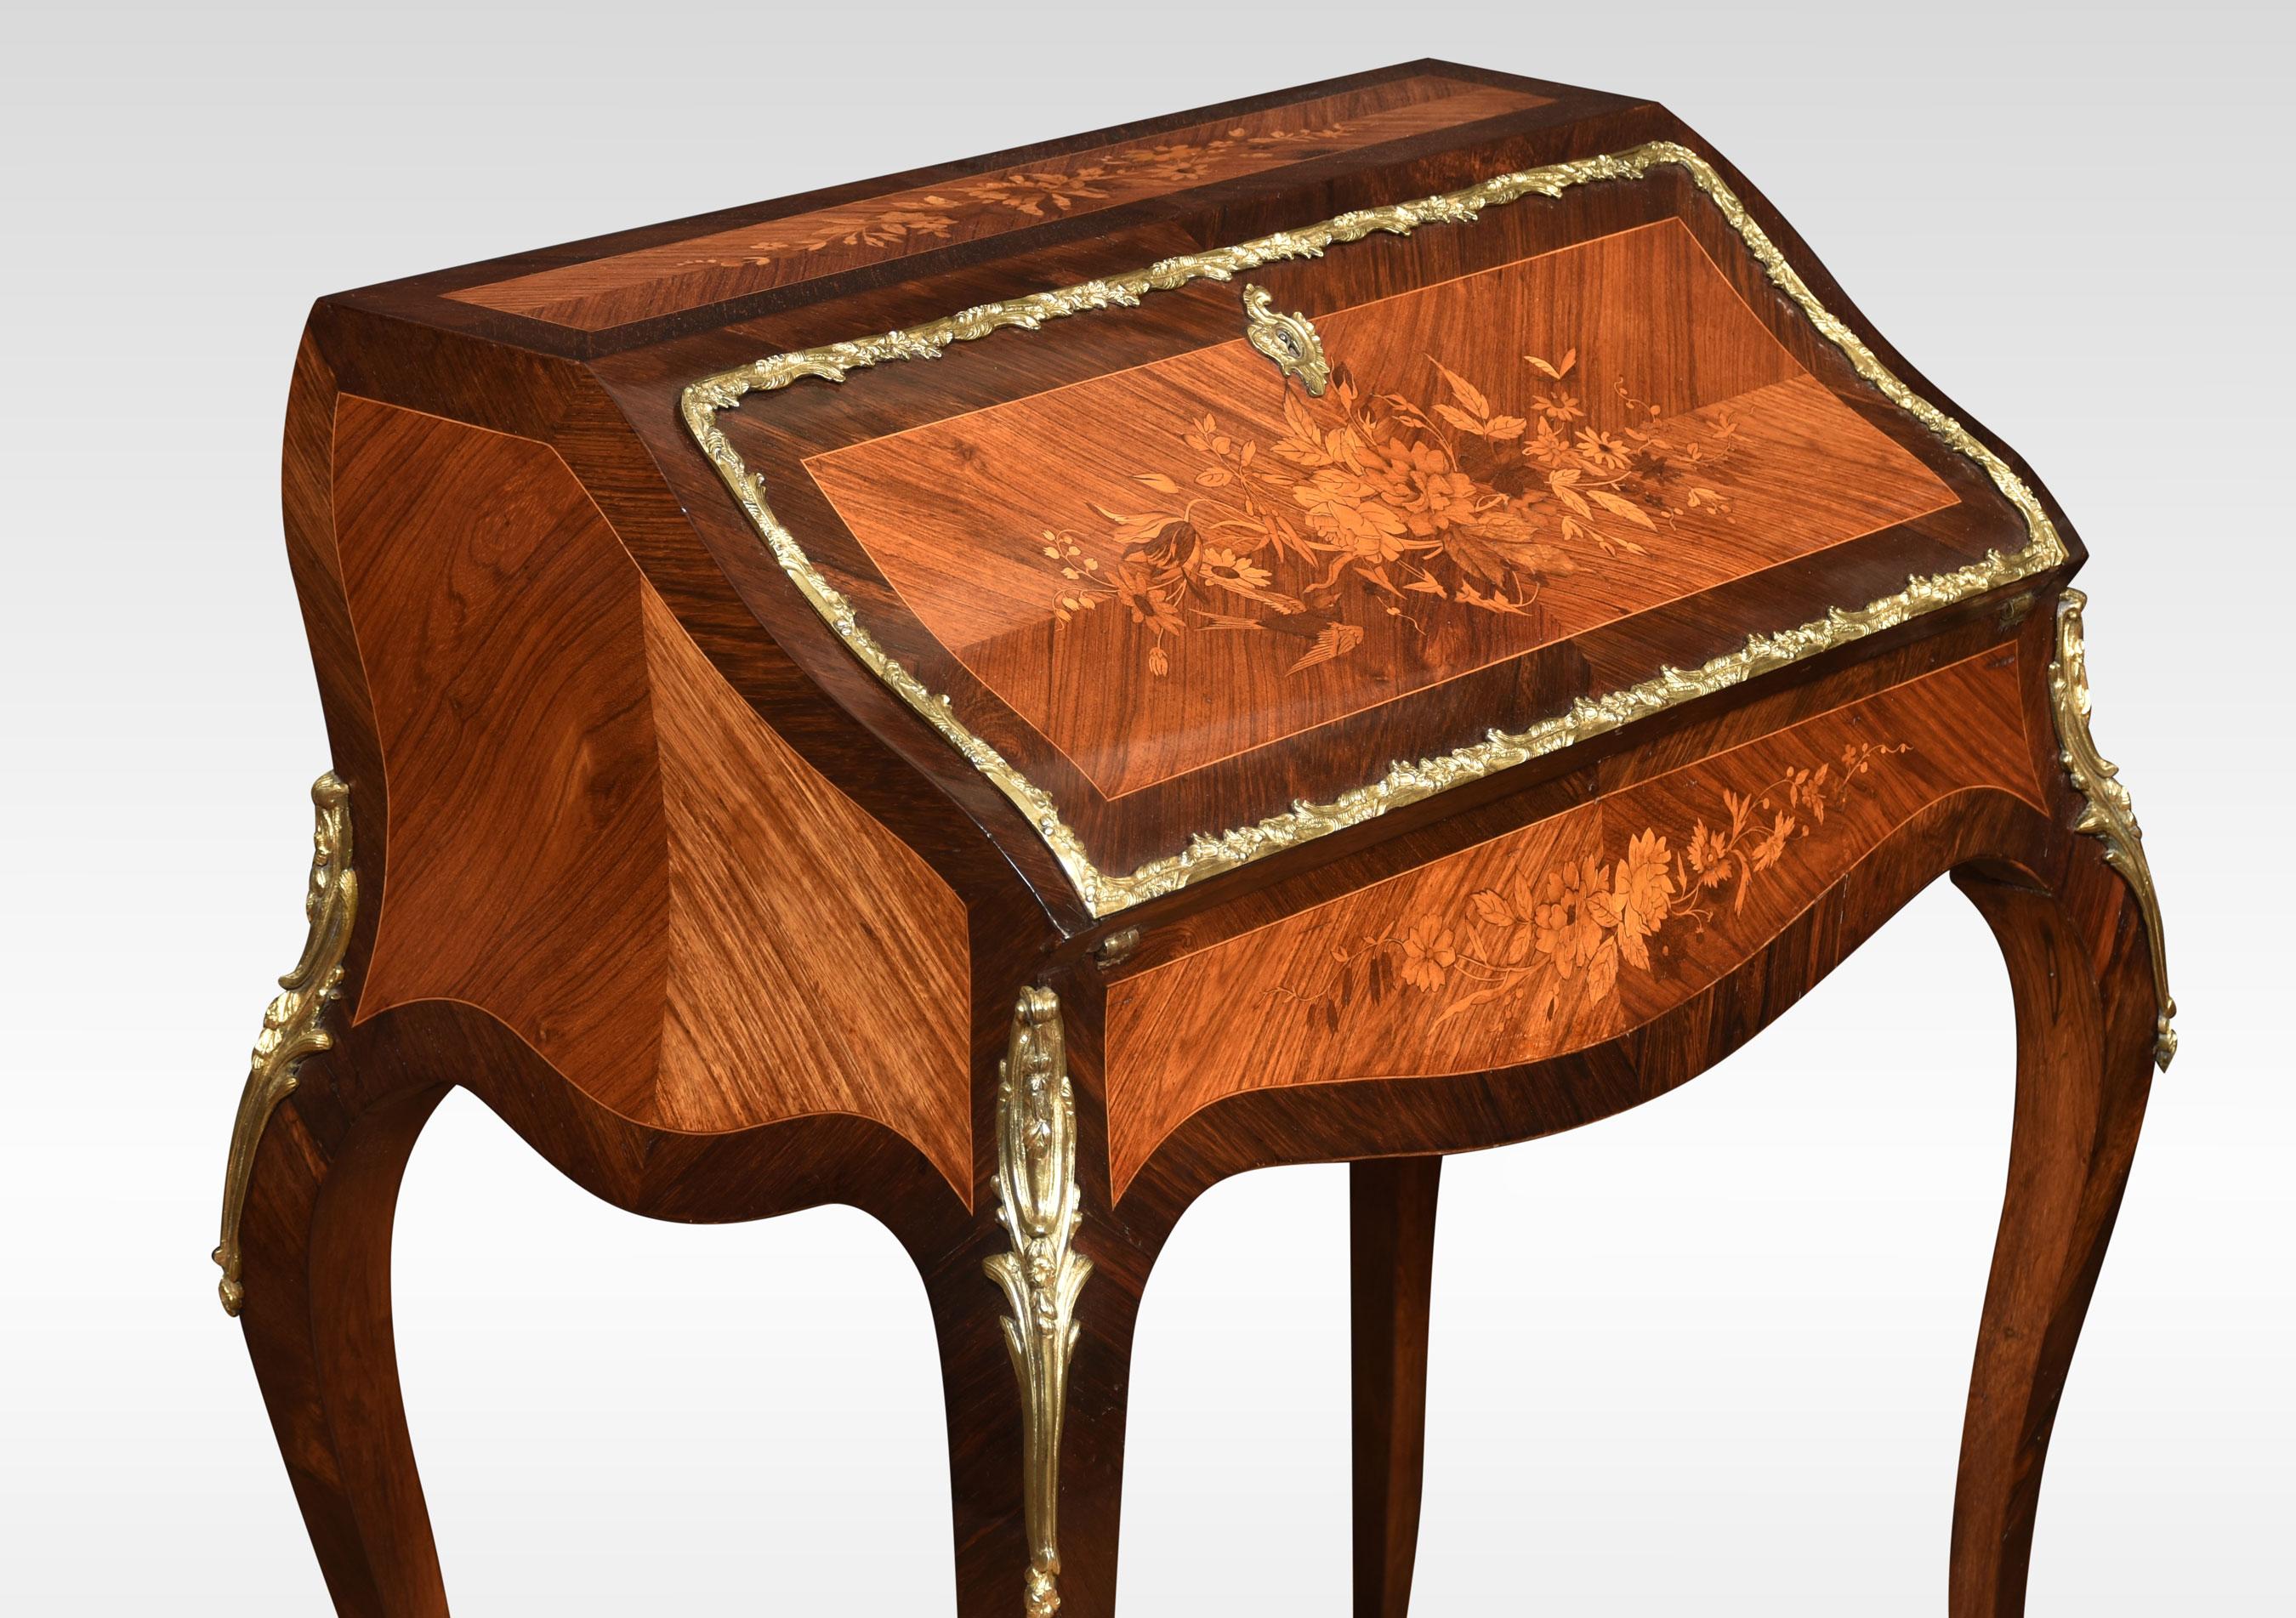 19th-century French gilt metal mounted walnut and marquetry bombe bureau de dame, in Louis XV style. The fall front encloses a fitted interior and inset writing surface. All raised up on four slender cabrioles brass mounted